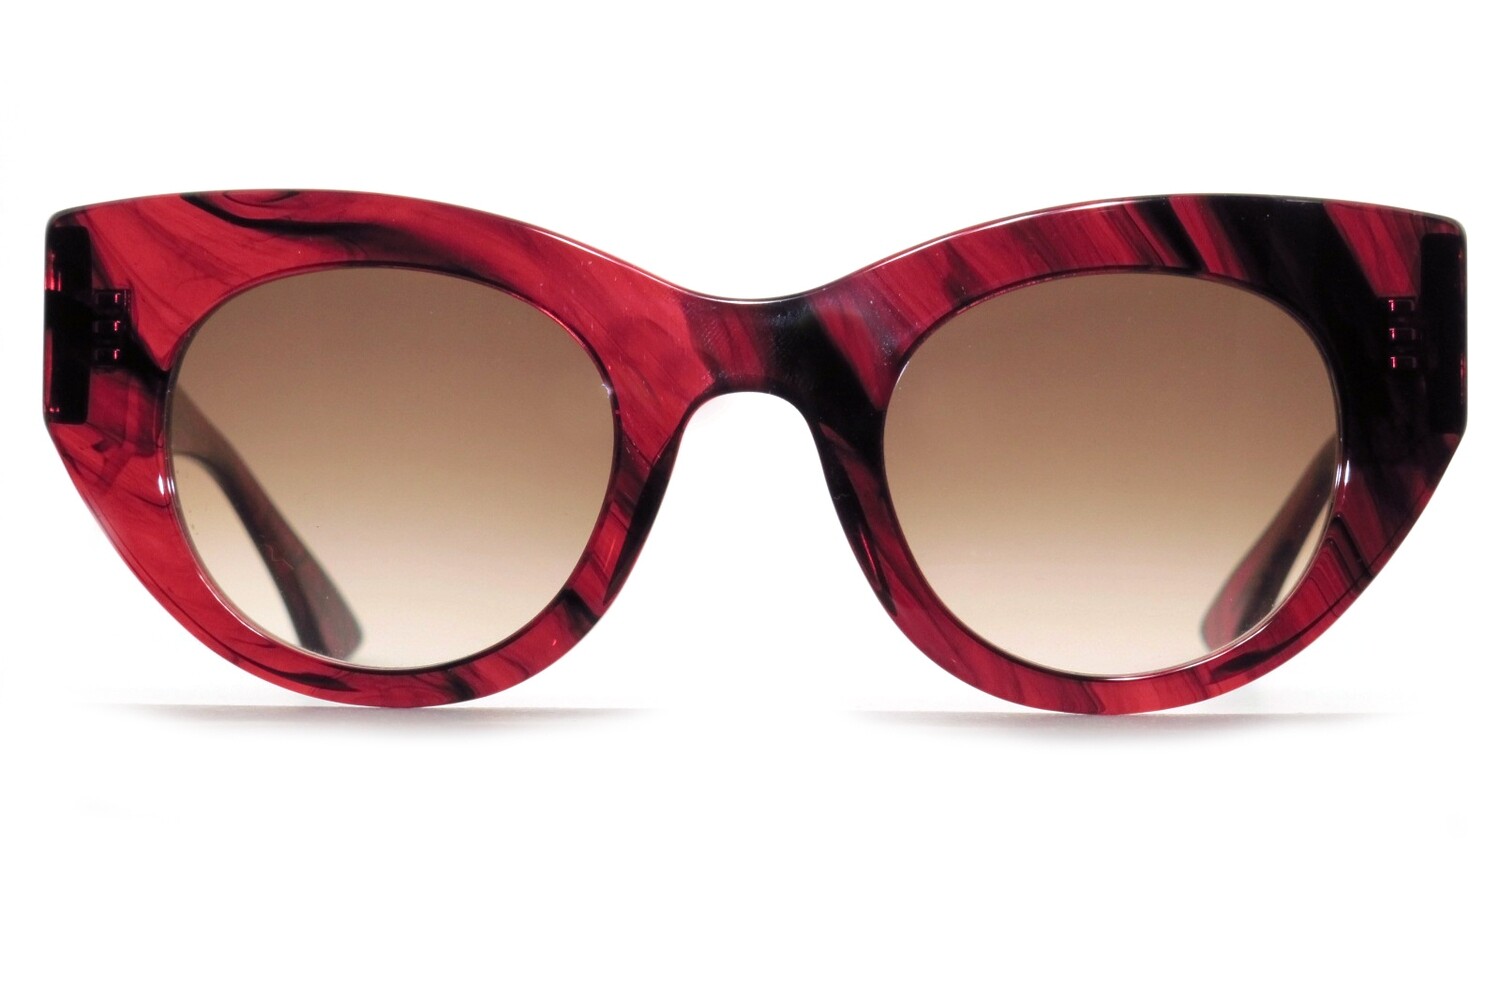 Utopy by Thierry Lasry